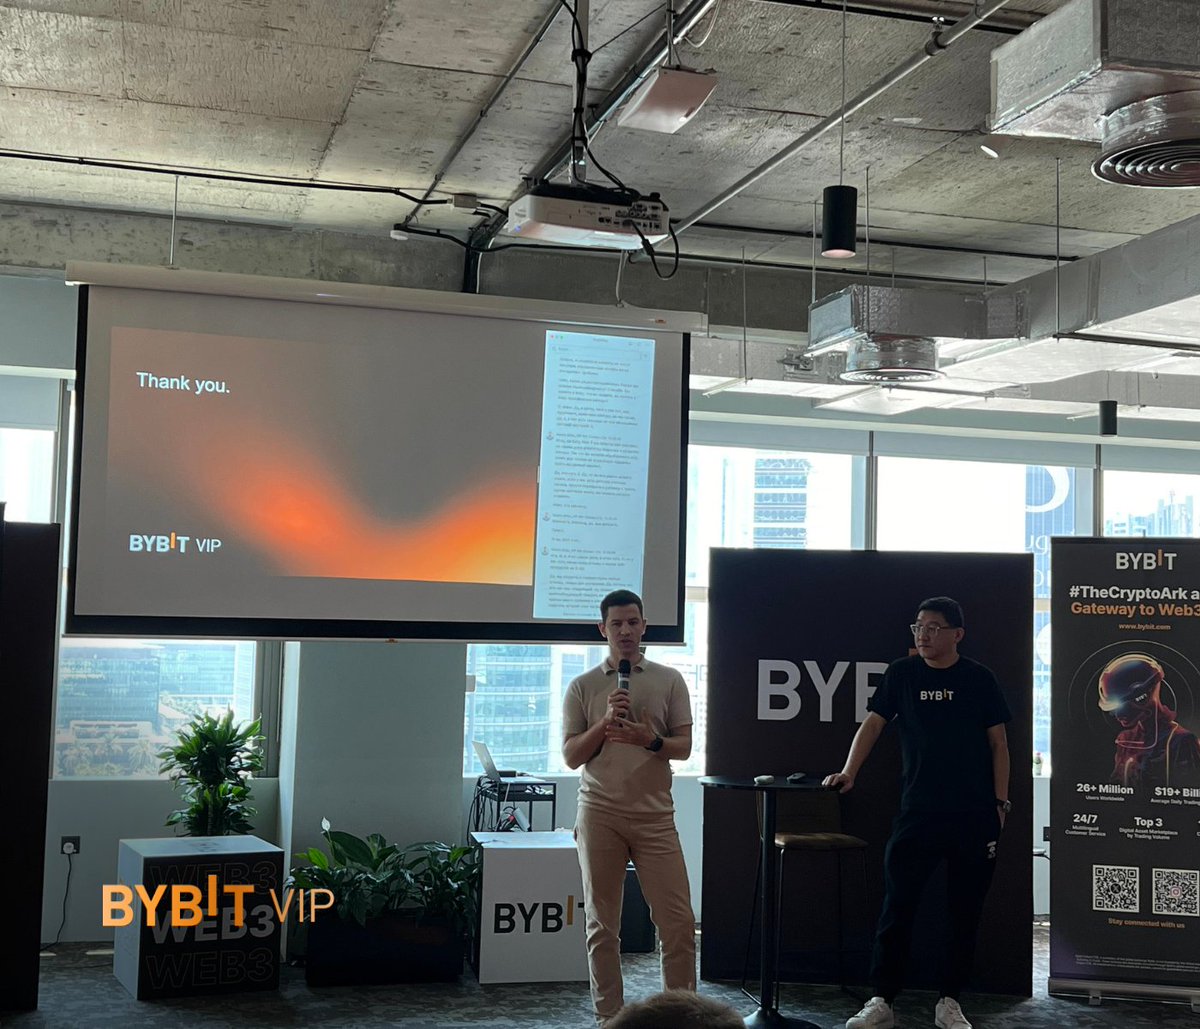 📸 Capturing moments of joy and learning at the Dubai Workshop! Our VIPs had an amazing time immersing themselves in knowledge ranging from different topics including the LFT Launchpad. ✅ More details here: i.bybit.com/1abxjNW6